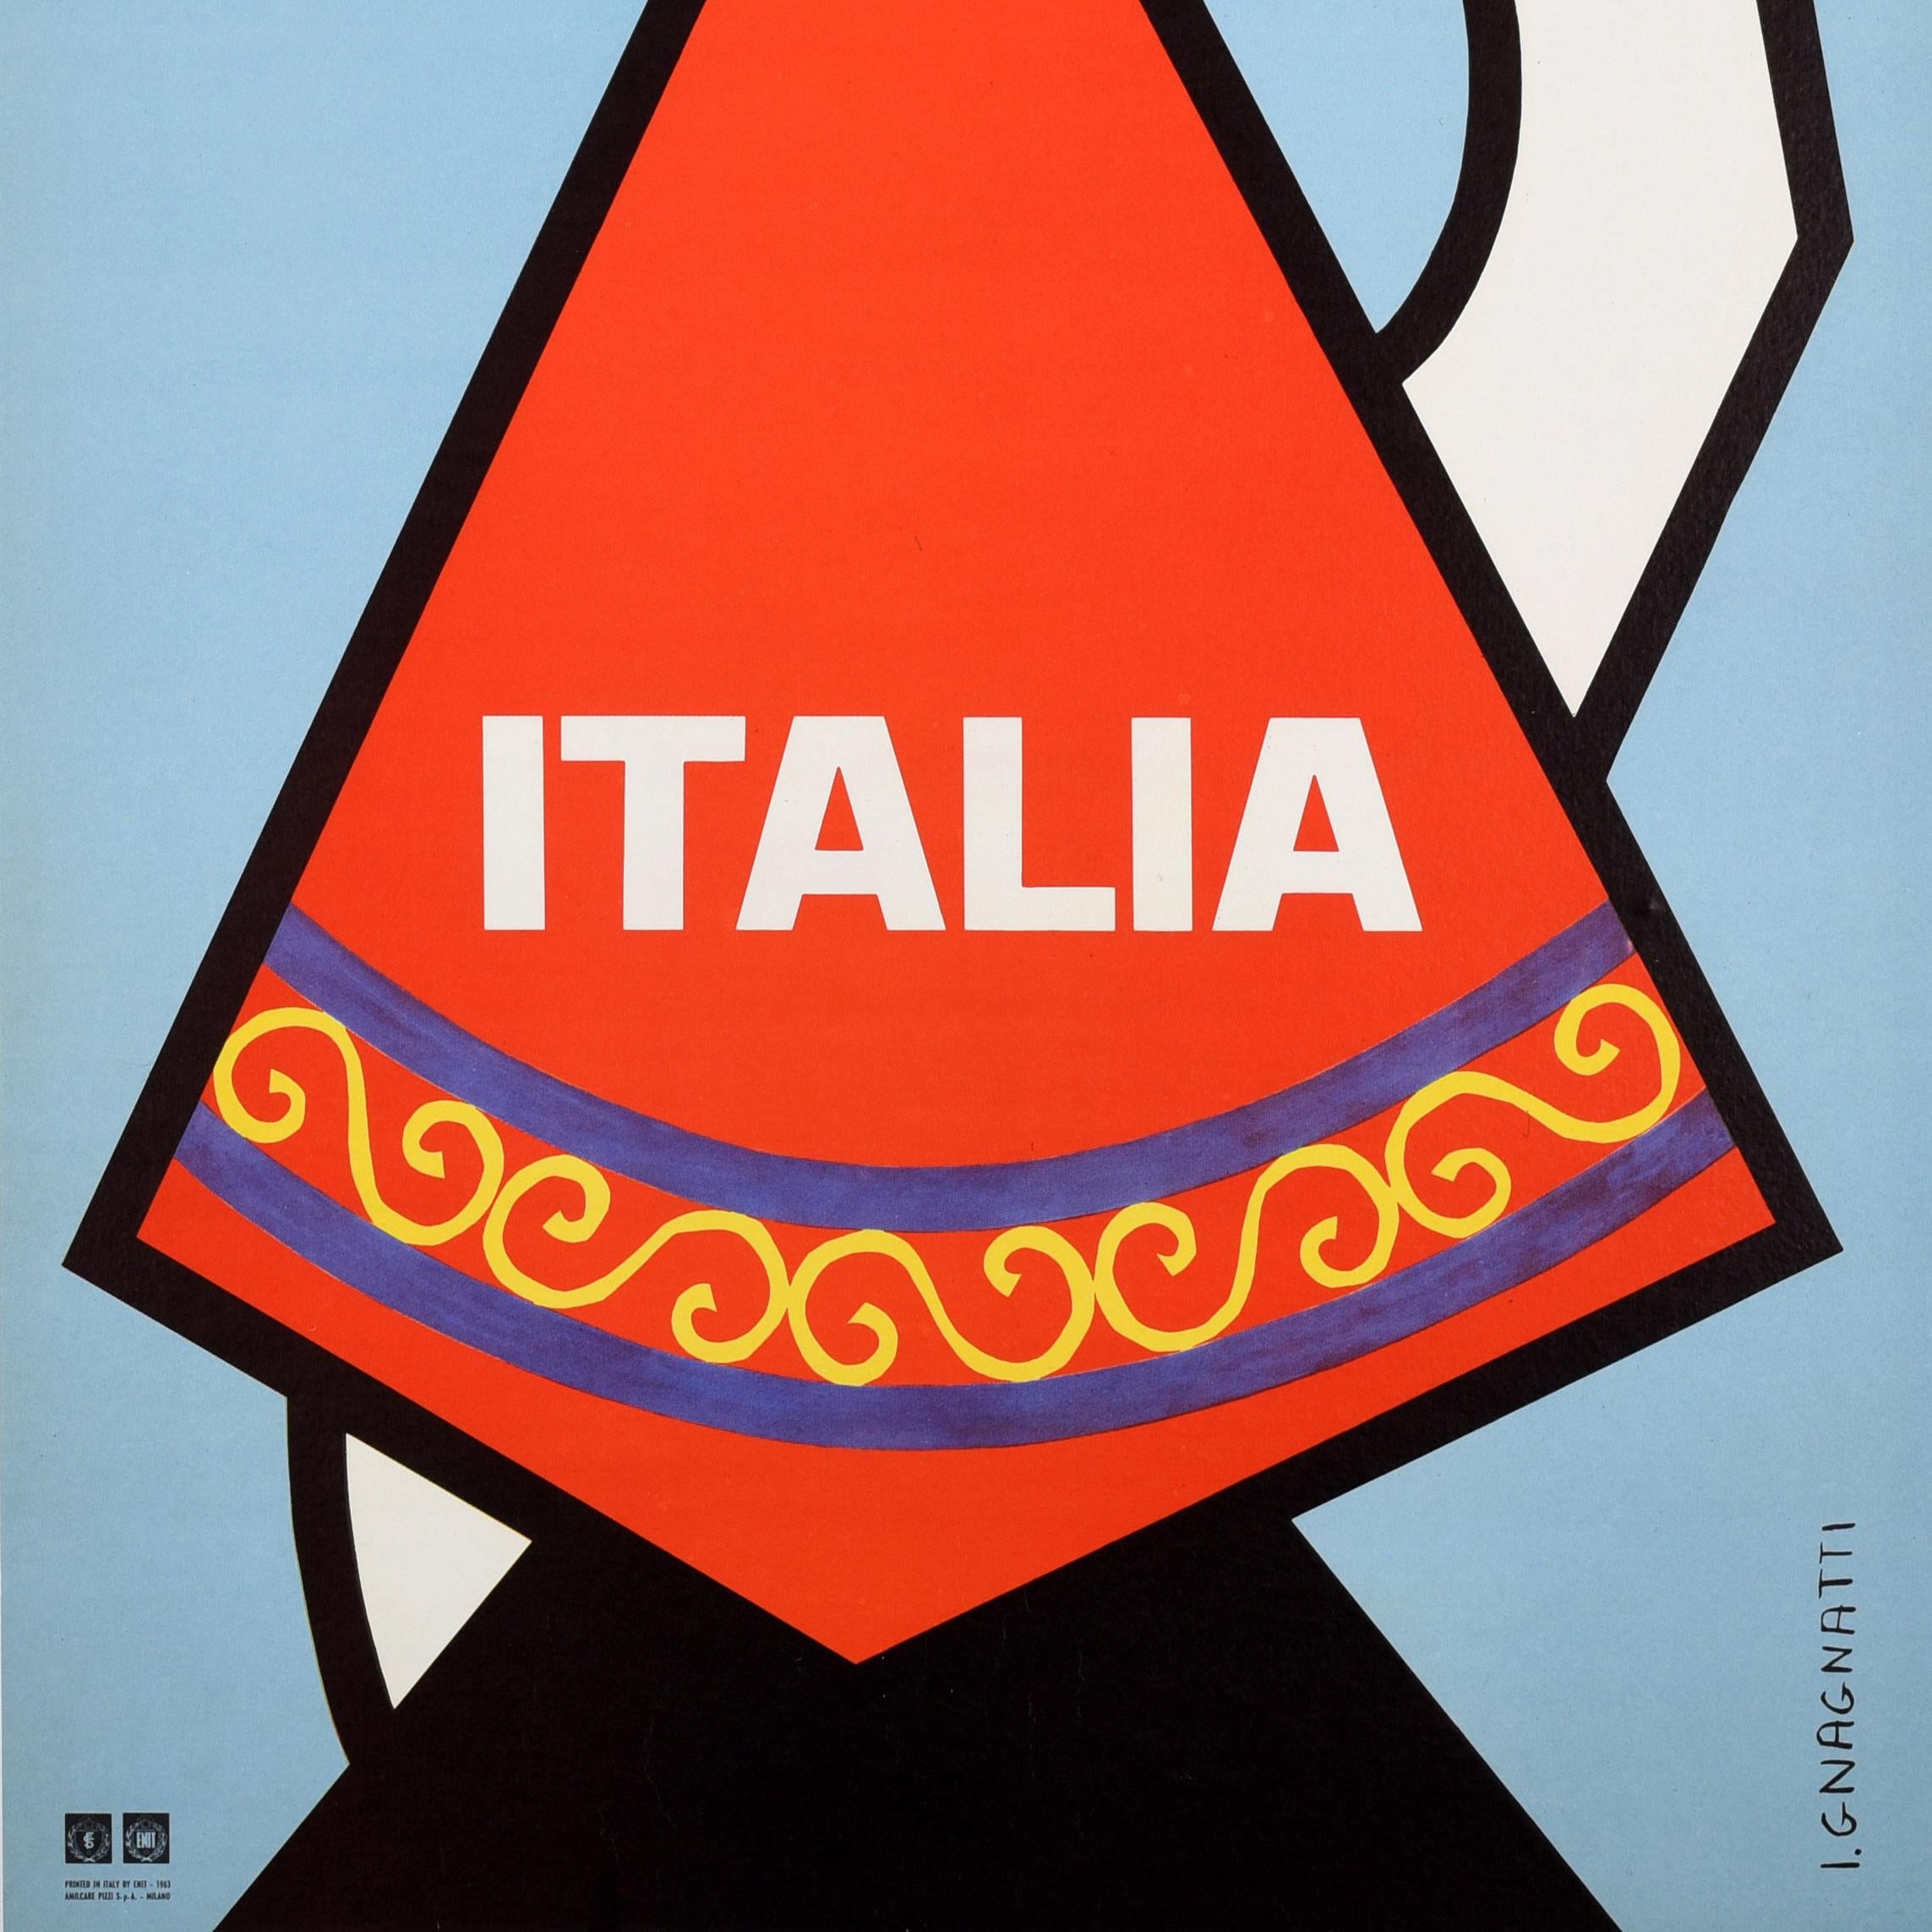 Original vintage travel poster for Italy / Italia issued by the Italian tourist board ENIT (Ente Nazionale Italiano per il Turismo) featuring a colourful mid-century design of a lady wearing a patterned red headscarf and holding a bowl of fruit on